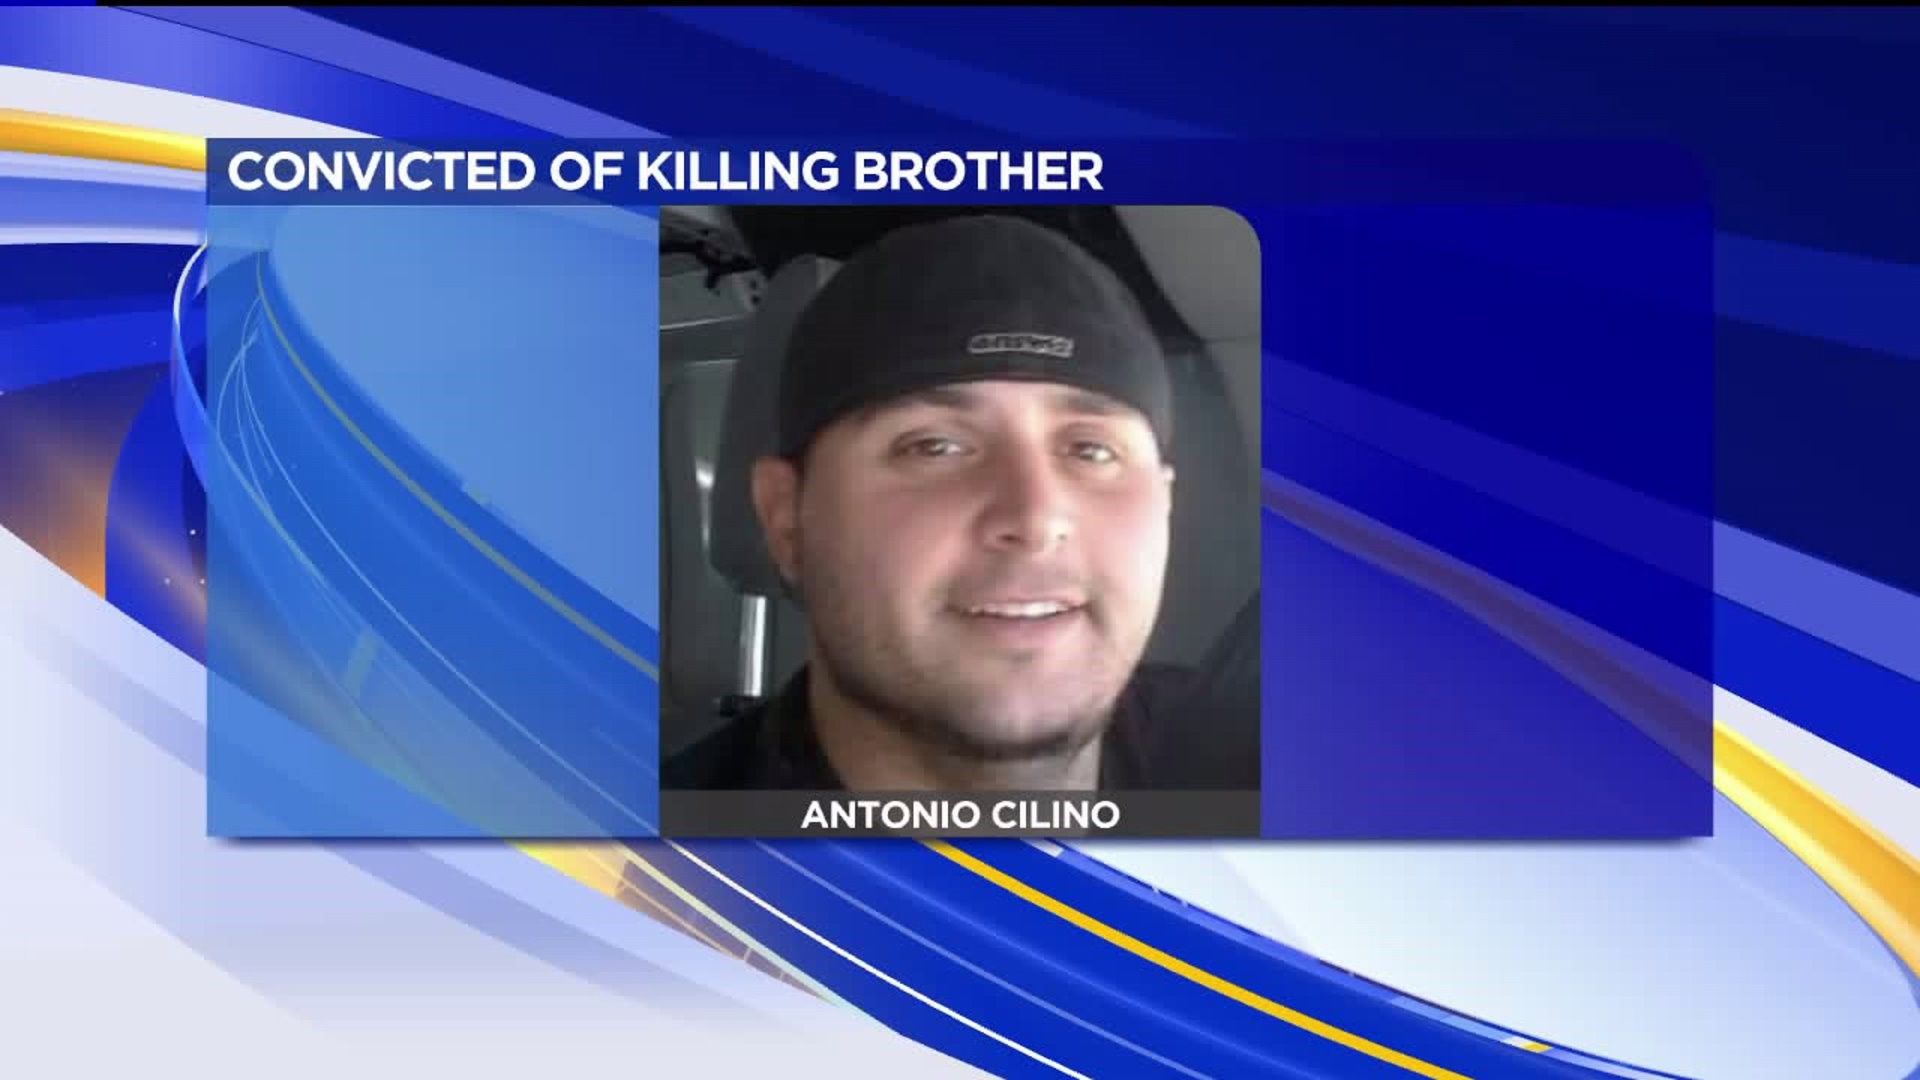 Man Convicted of Killing Brother